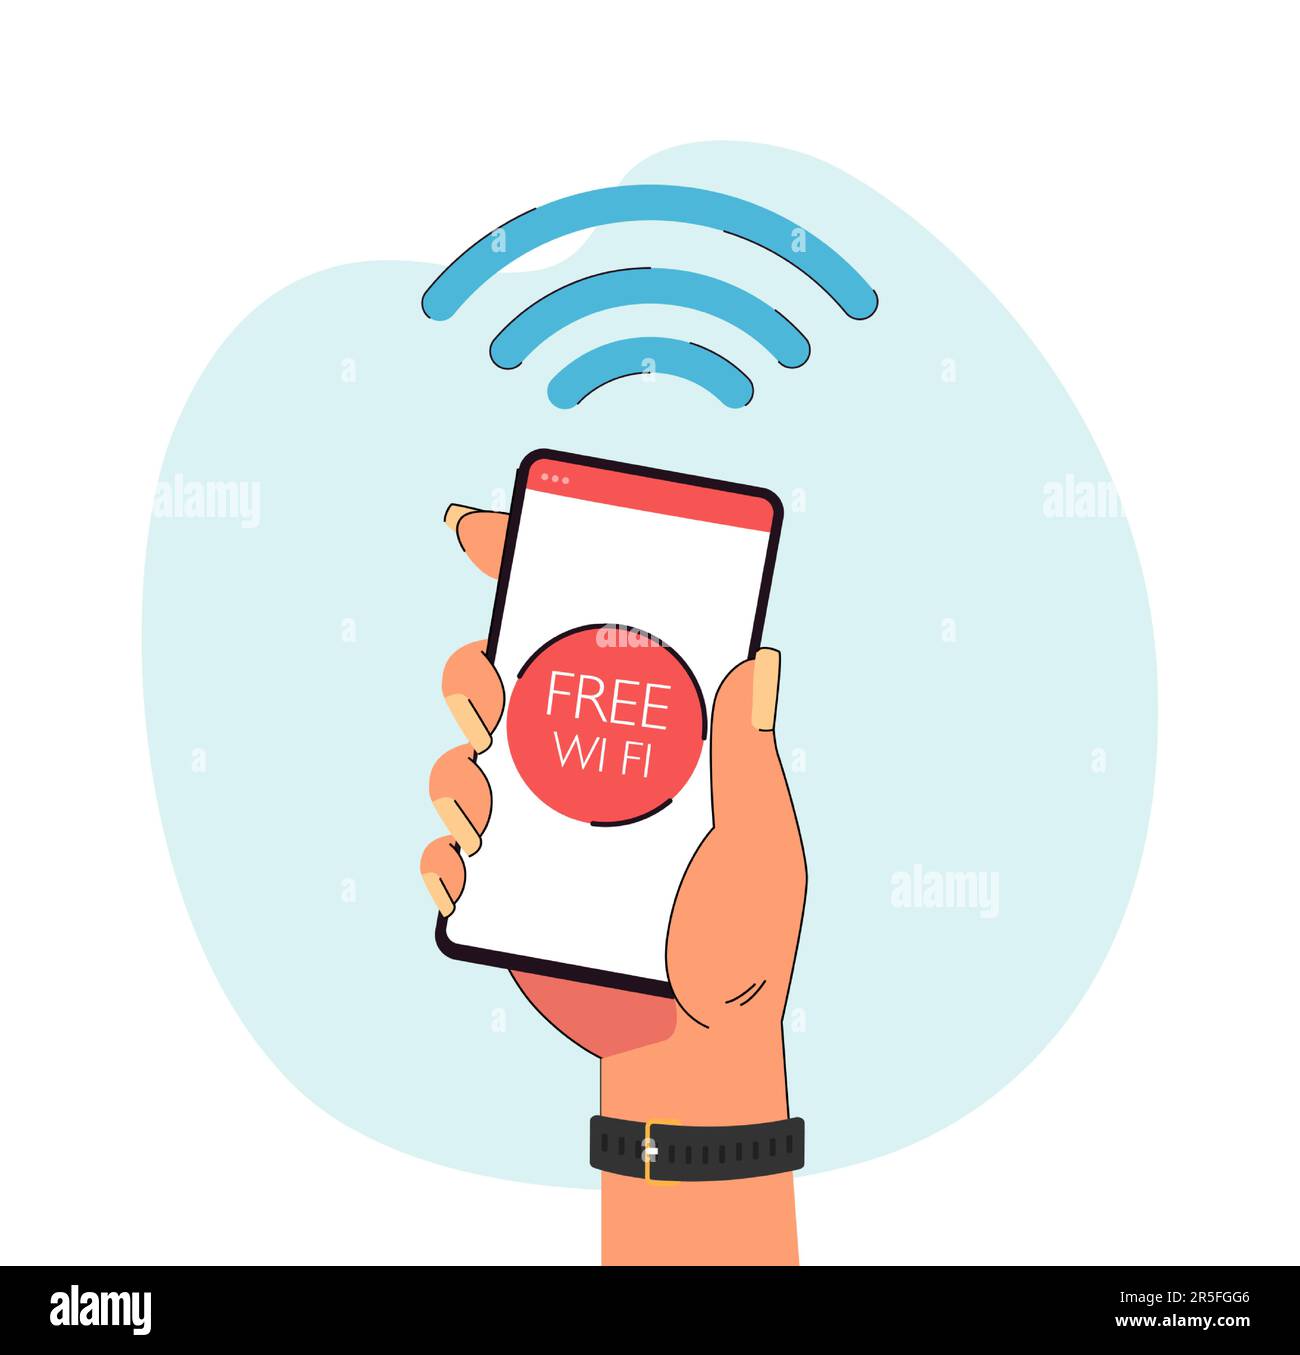 Hand holding smartphone with free Wi-Fi symbol on screen Stock Vector